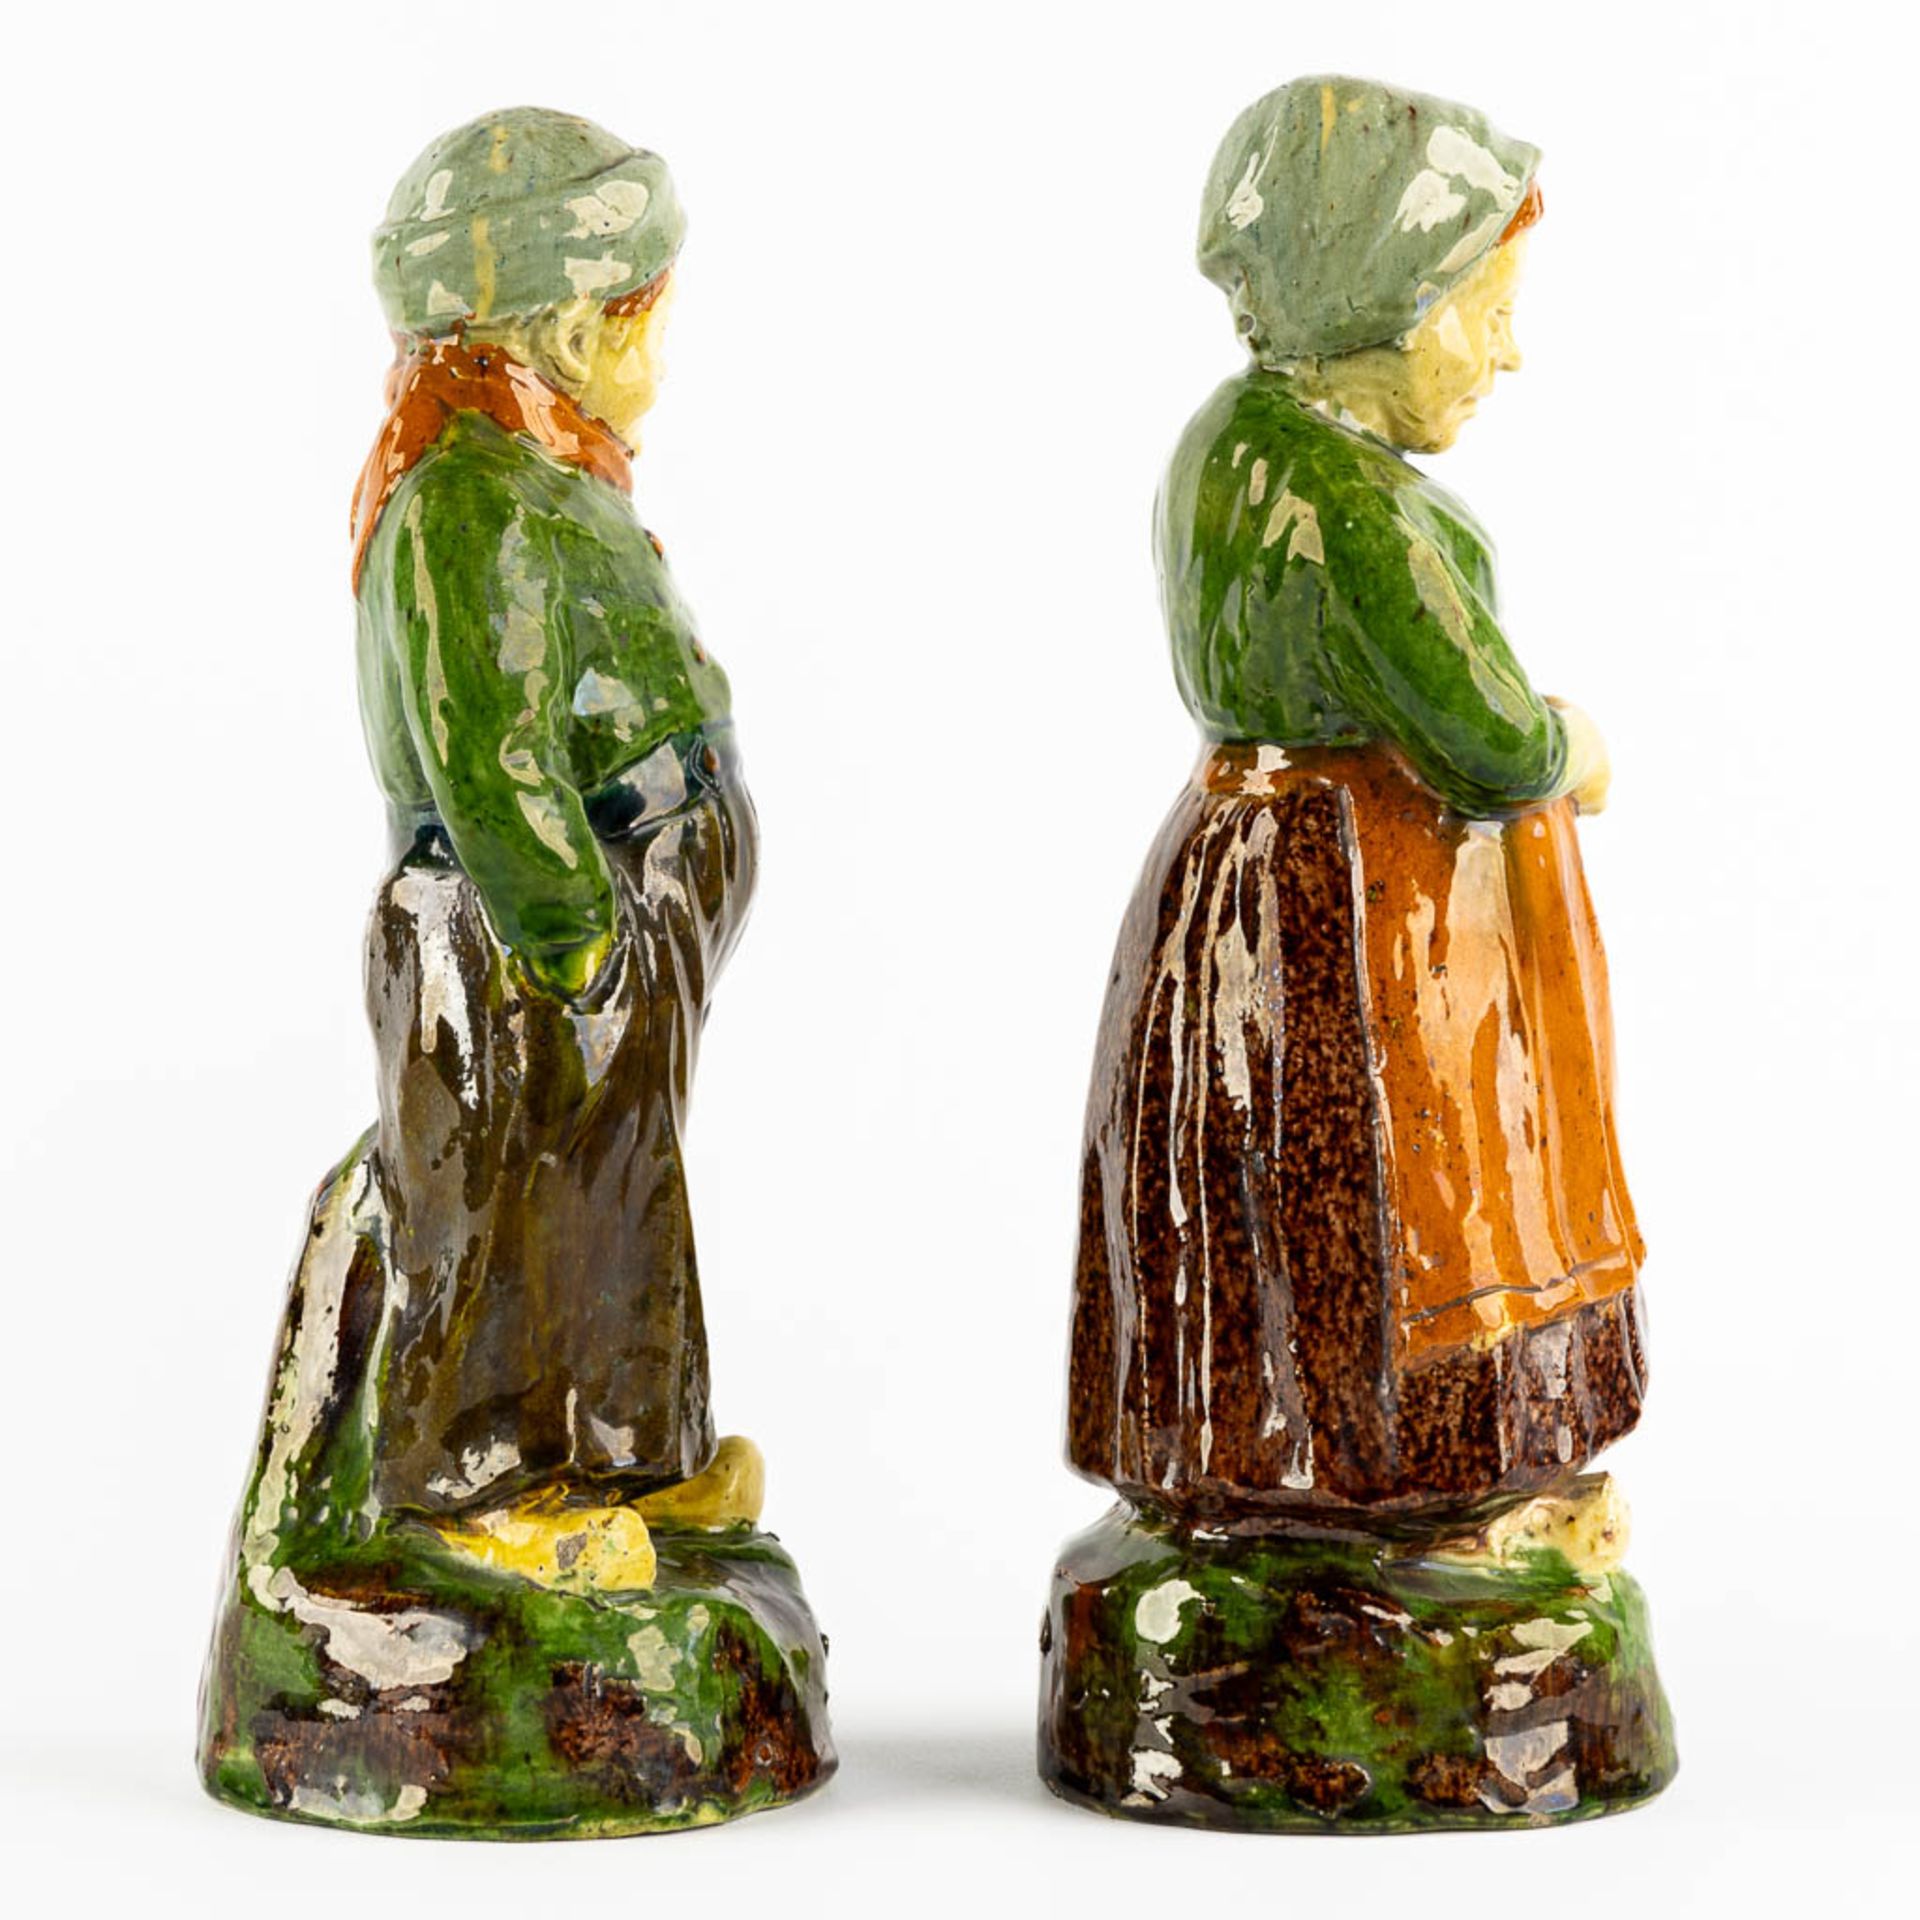 Figurine of a Man and Woman, Flemish Earthenware, possibly Caessens. Circa 1900. (H:32 x D:12 cm) - Image 4 of 9